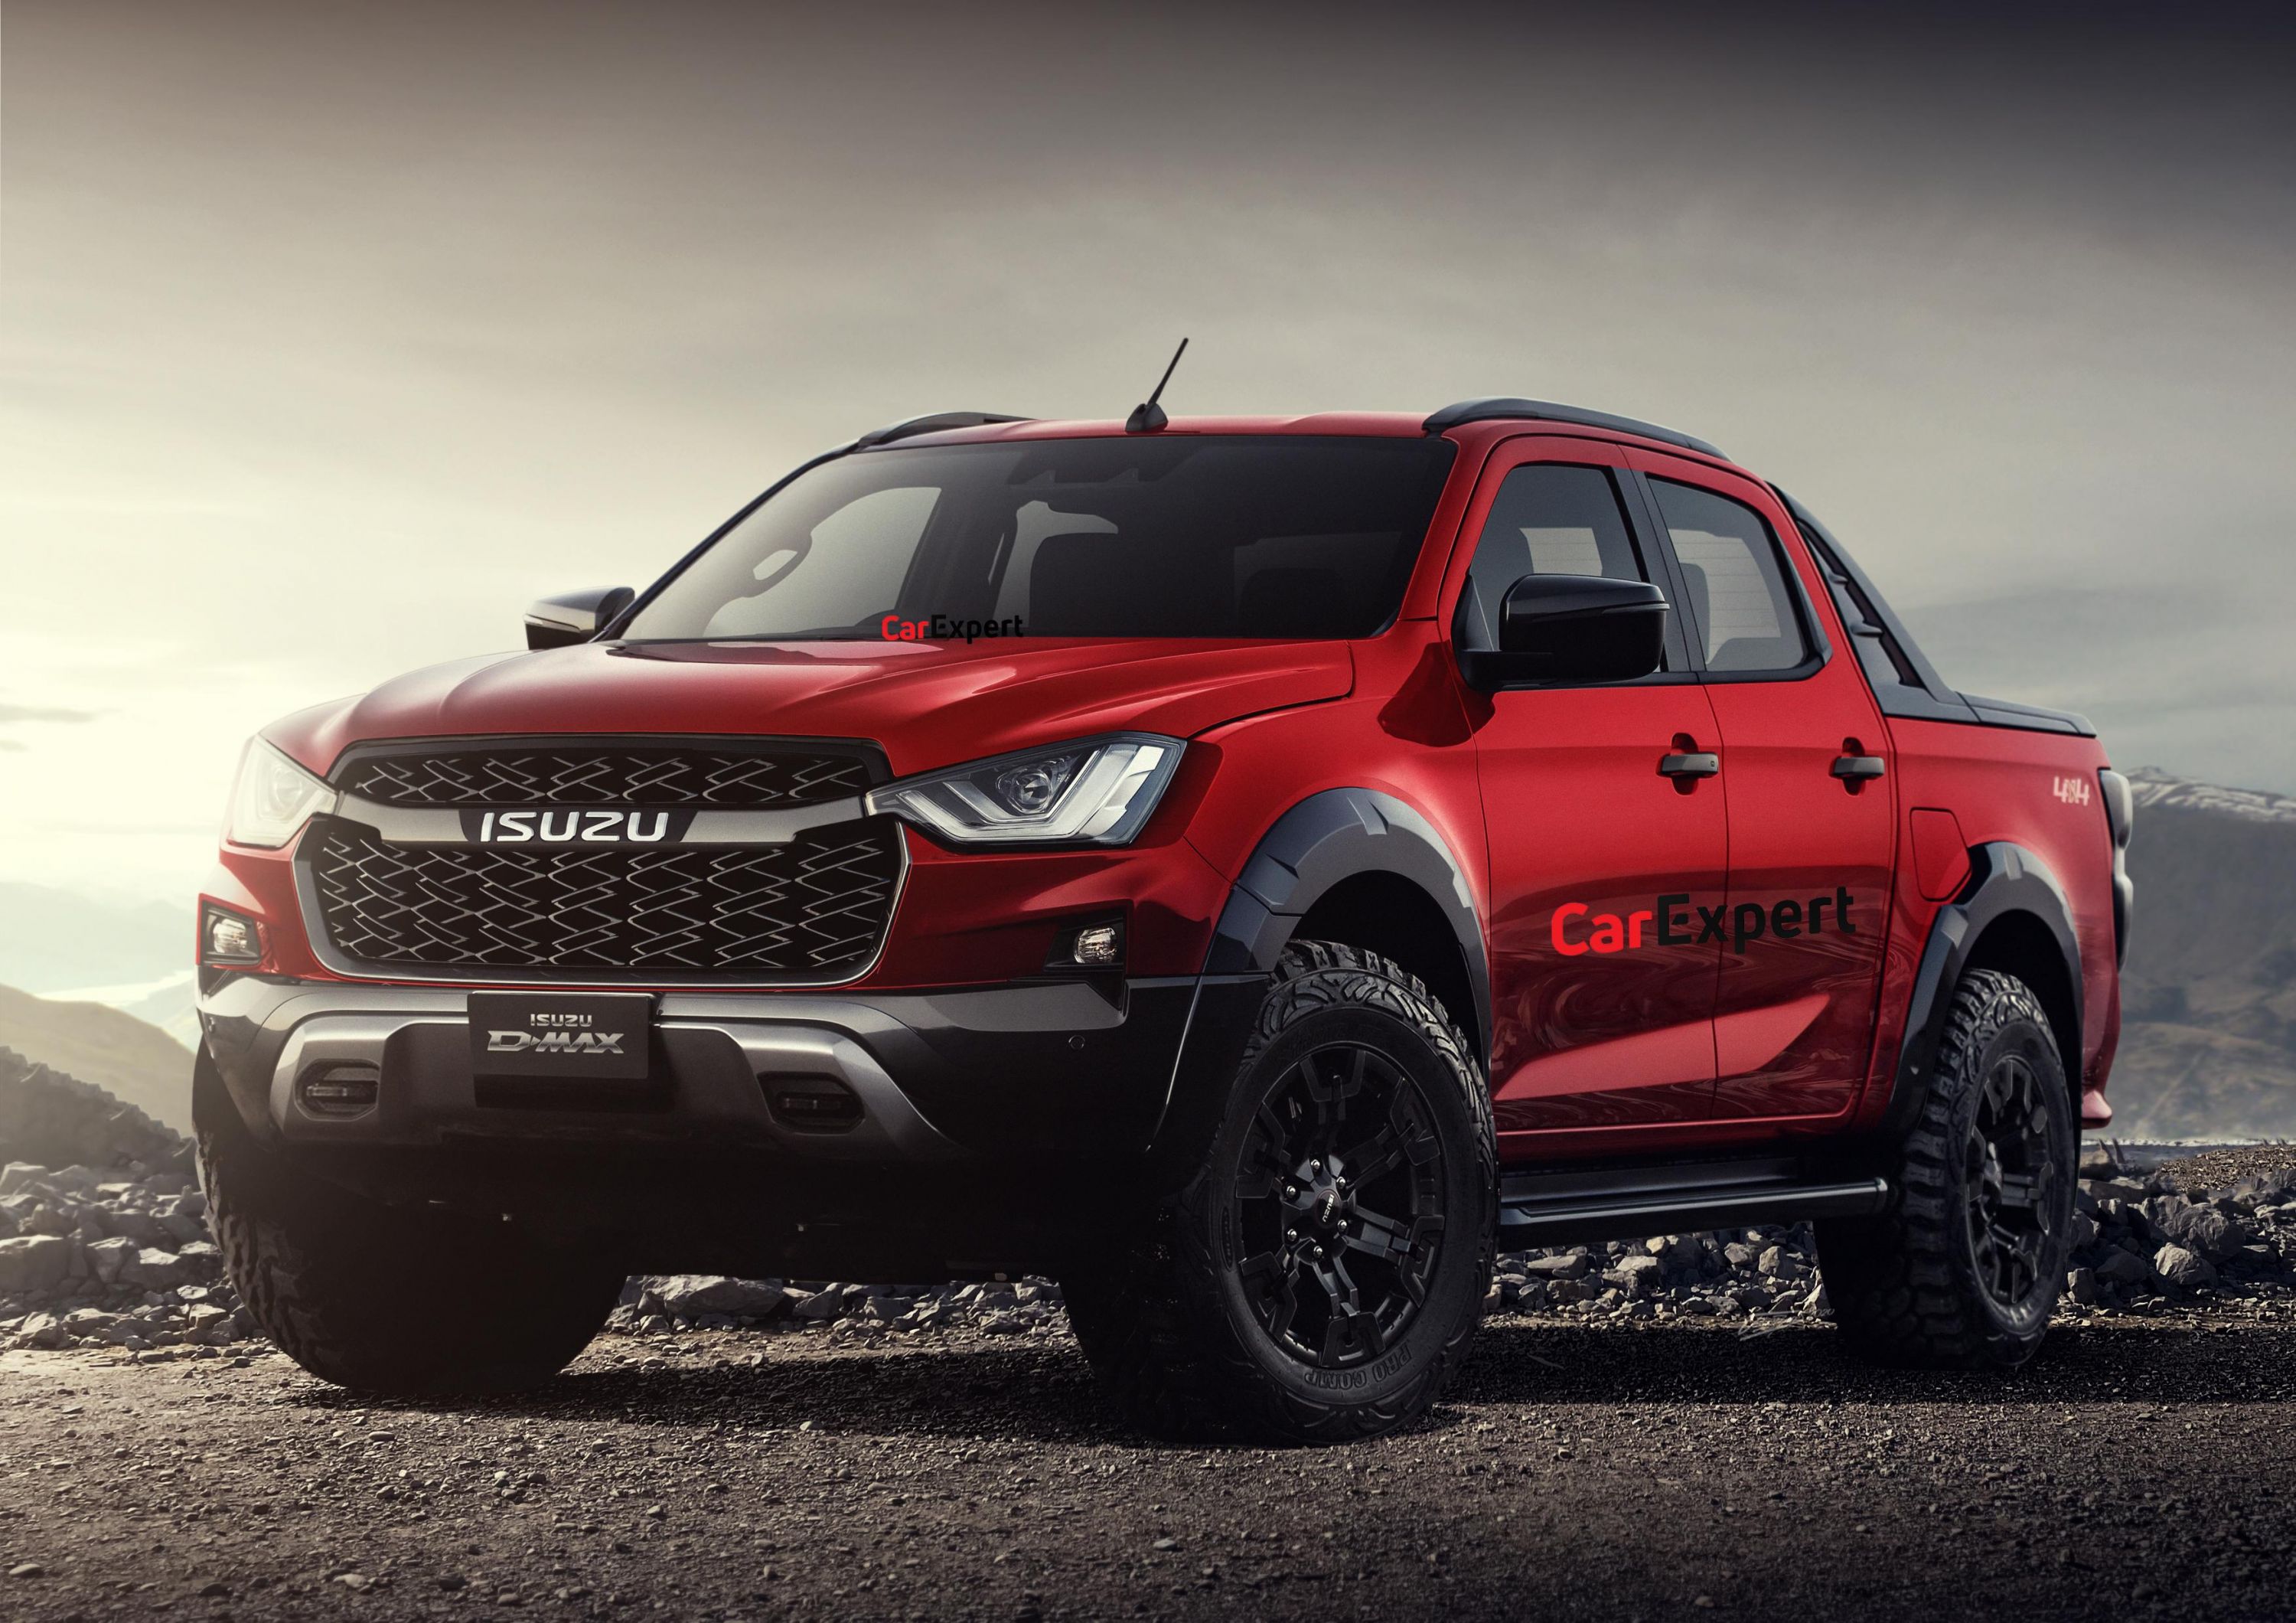 2021 Mazda BT50 and Isuzu DMax to get offroad pack and more power